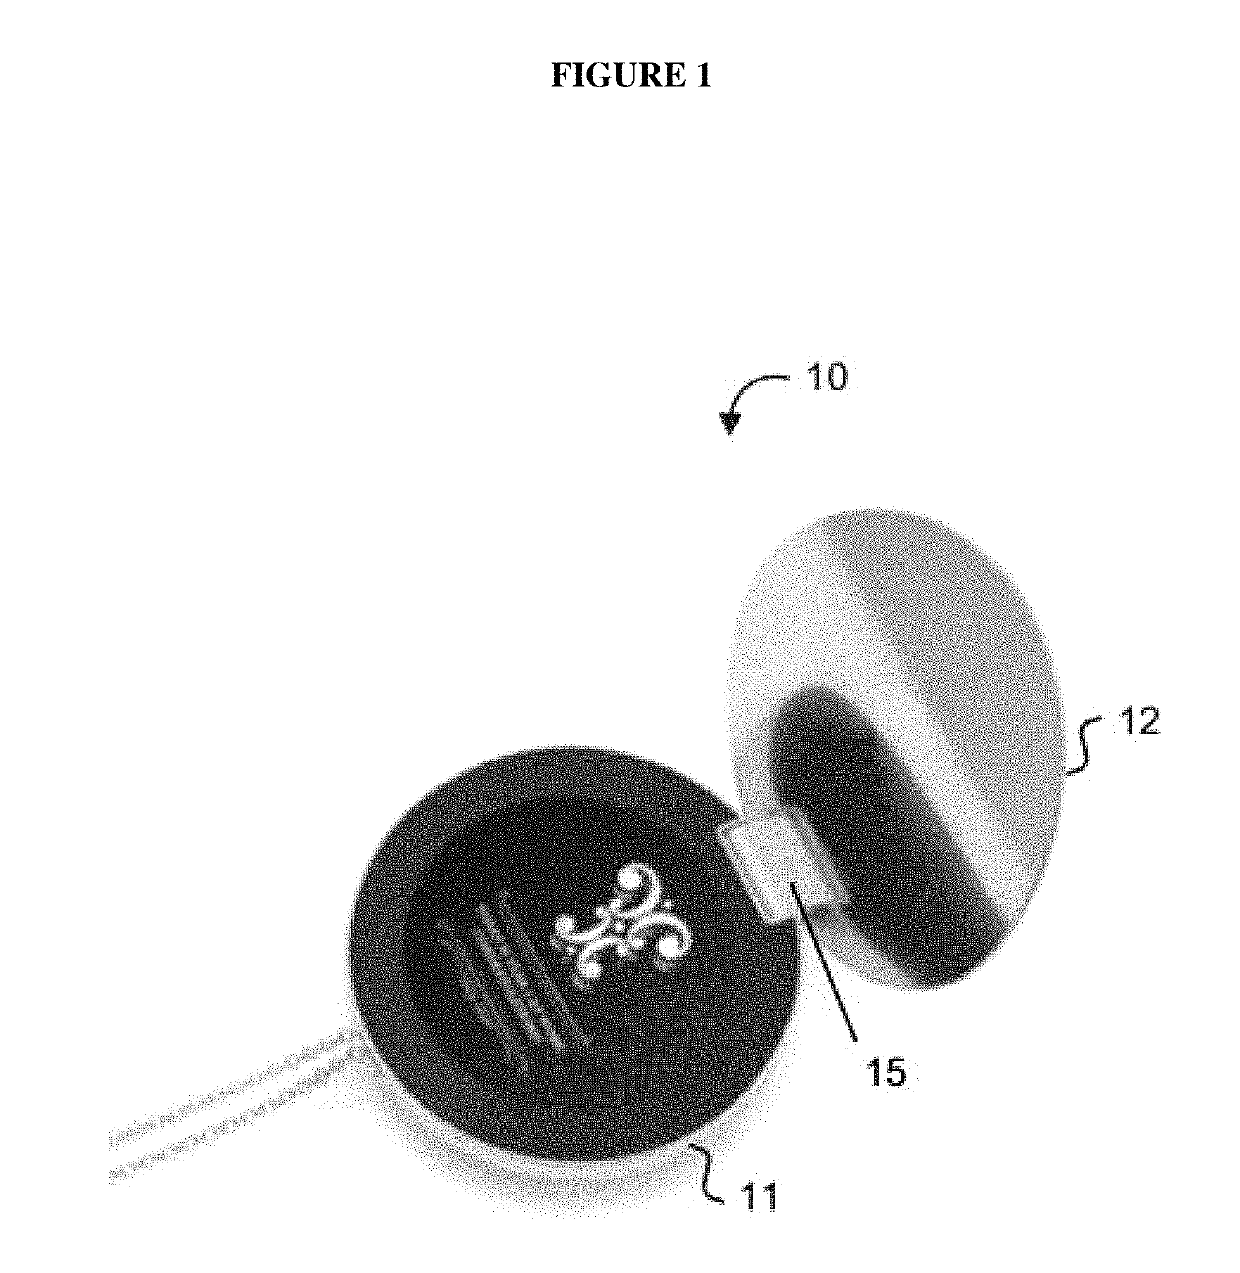 System and method for displaying digital imagery on a digital imagery display locket